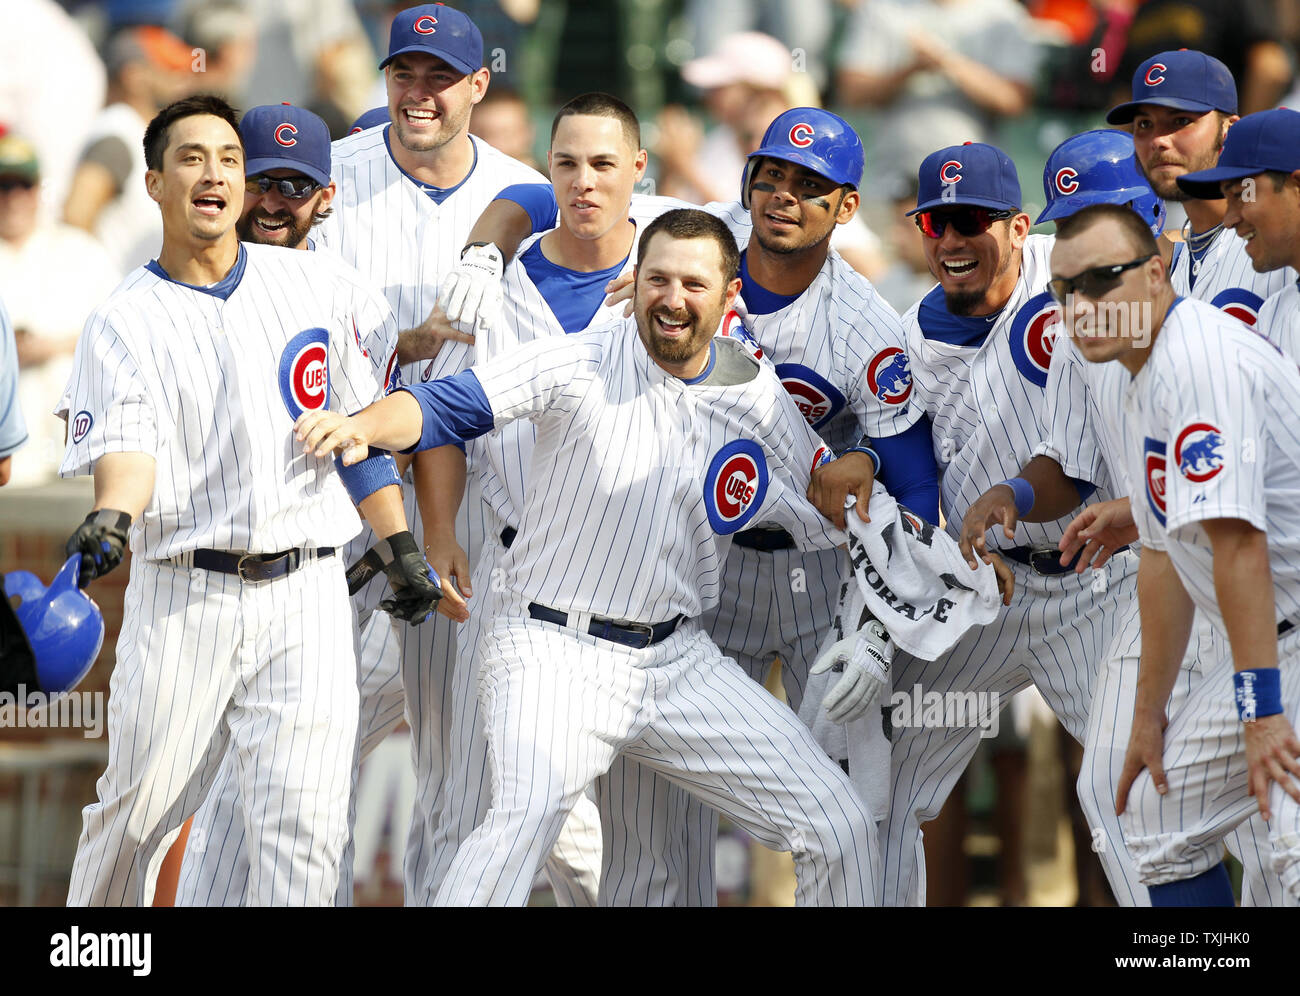 .The Chicago Cubs gather at home plate after pinch hitter Geovany Soto's three run home run to beat the San Francisco Giants during the thirteenth inning at Wrigley Field in Chicago on June 30, 2011. The Cubs defeated the Giants 5-2 in 13 innings. UPI /Mark Cowan Stock Photo